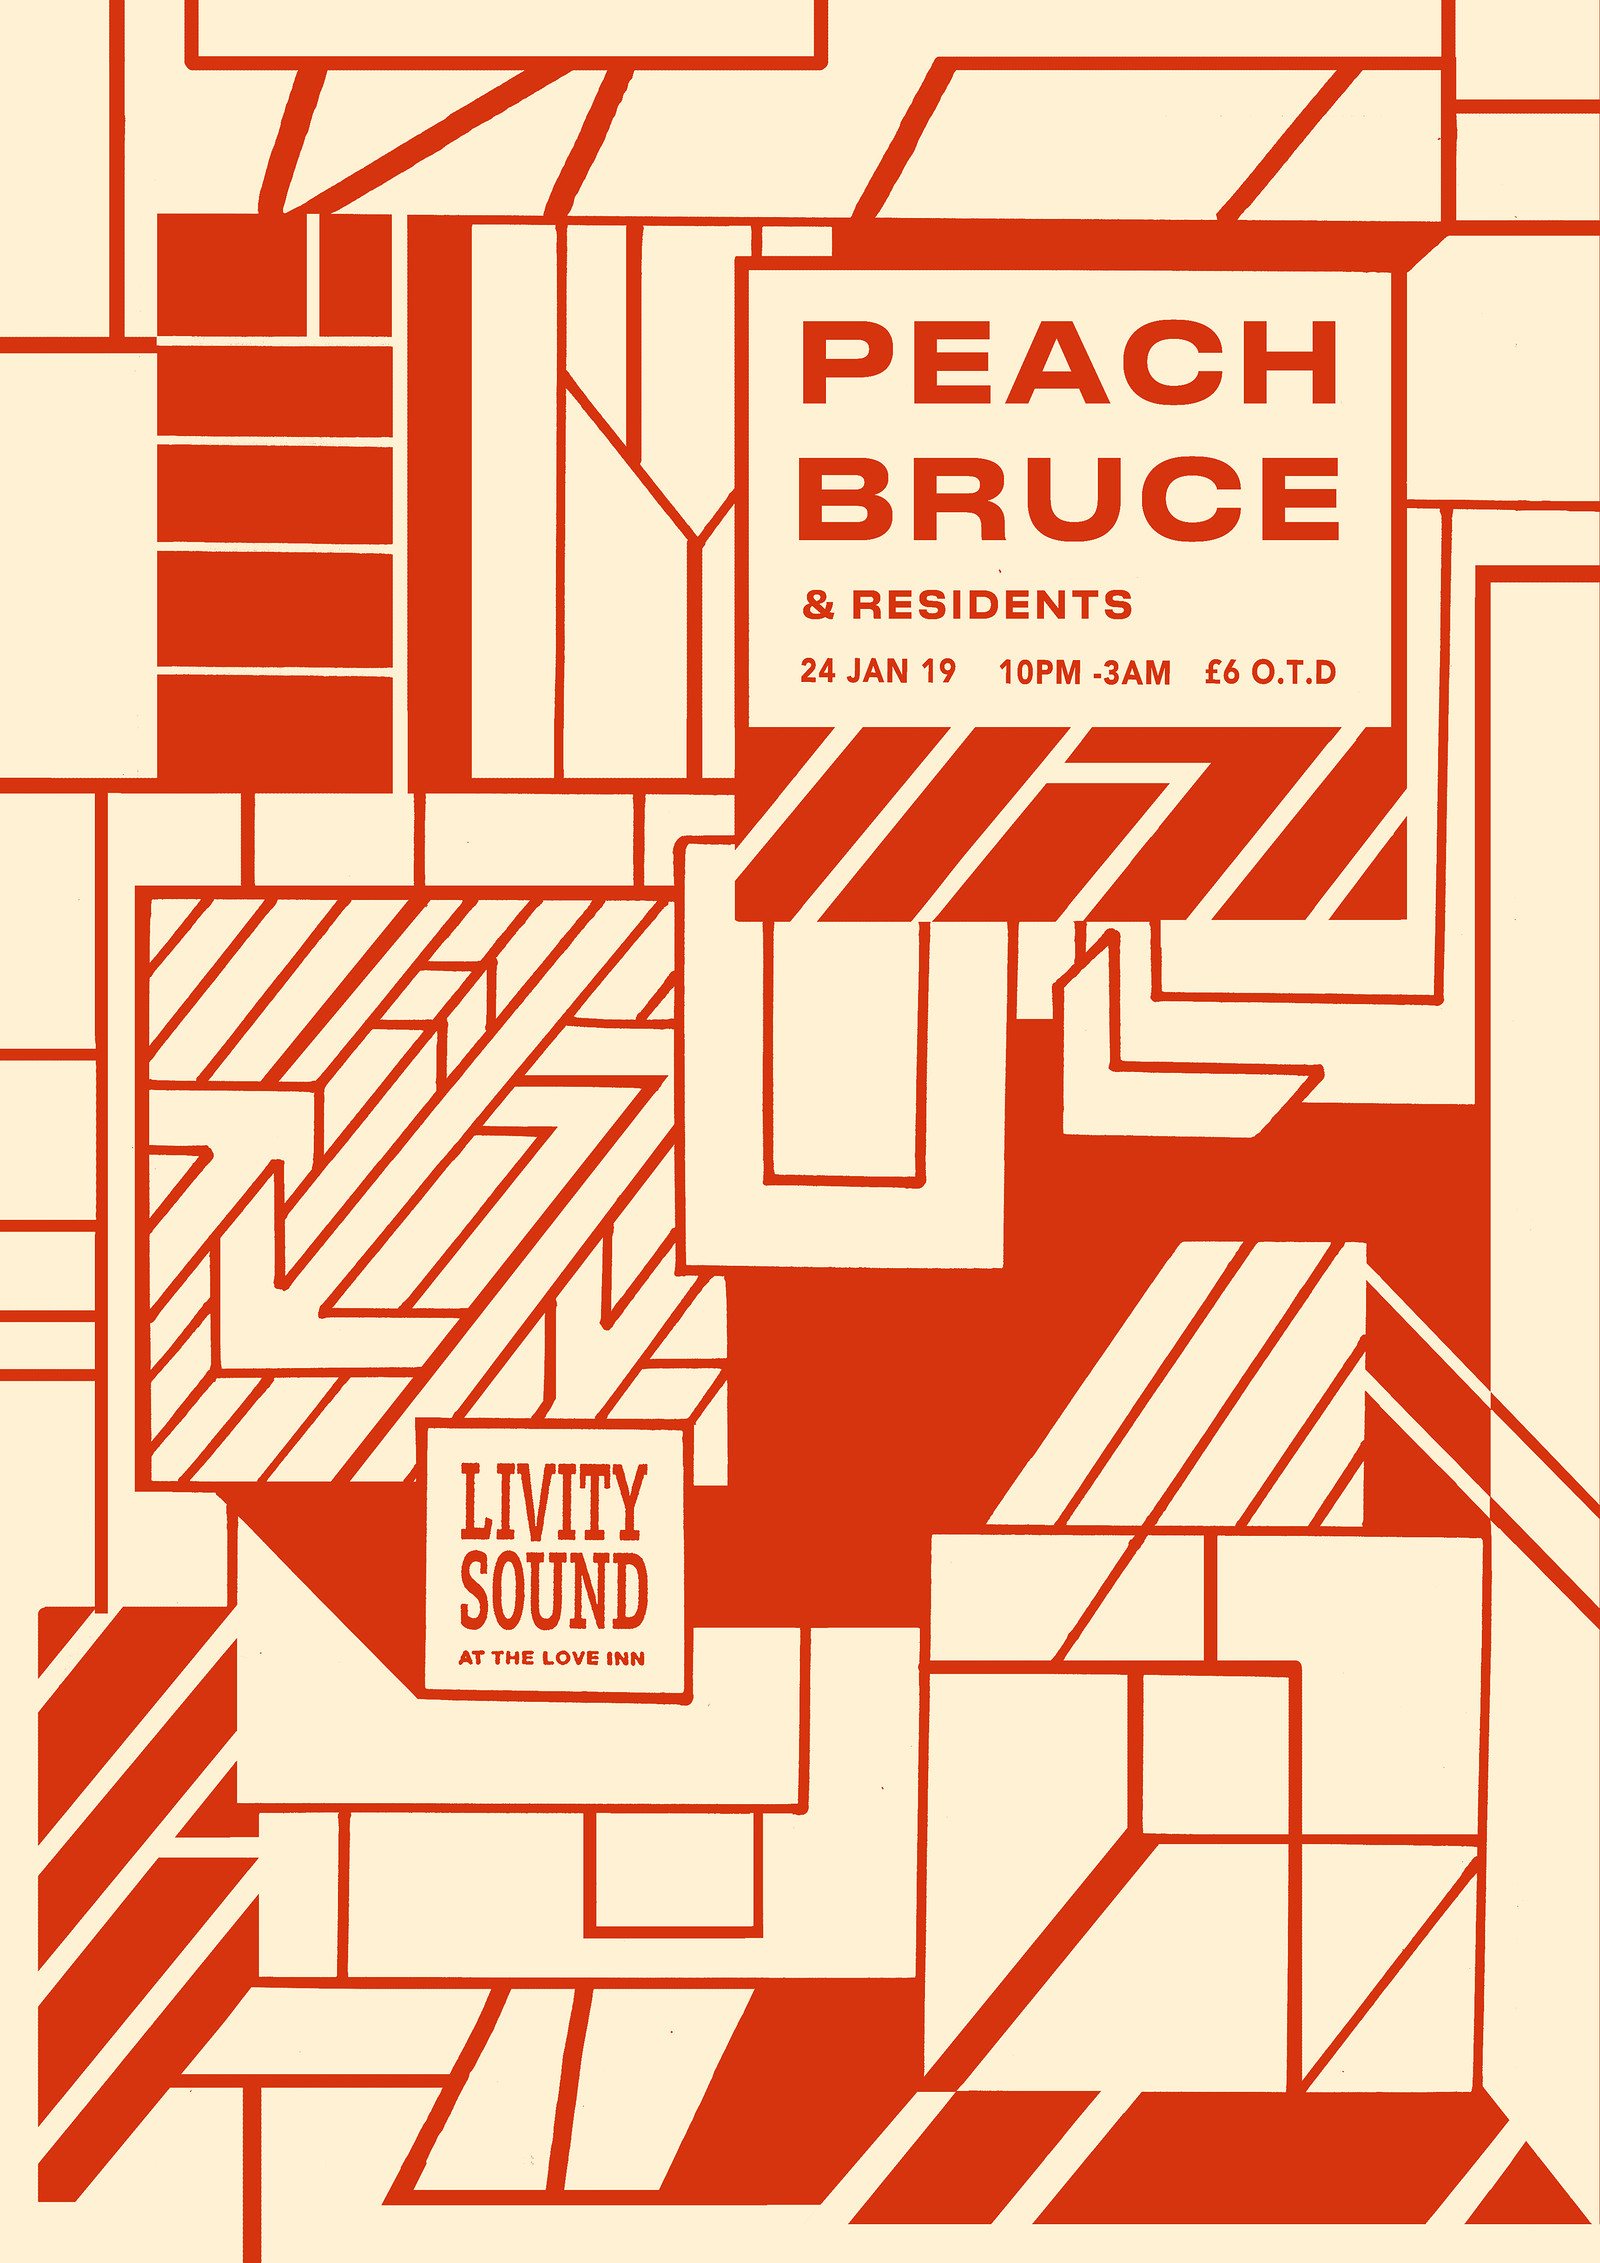 Livity Sound w/ Peach, Bruce and residents at The Love Inn